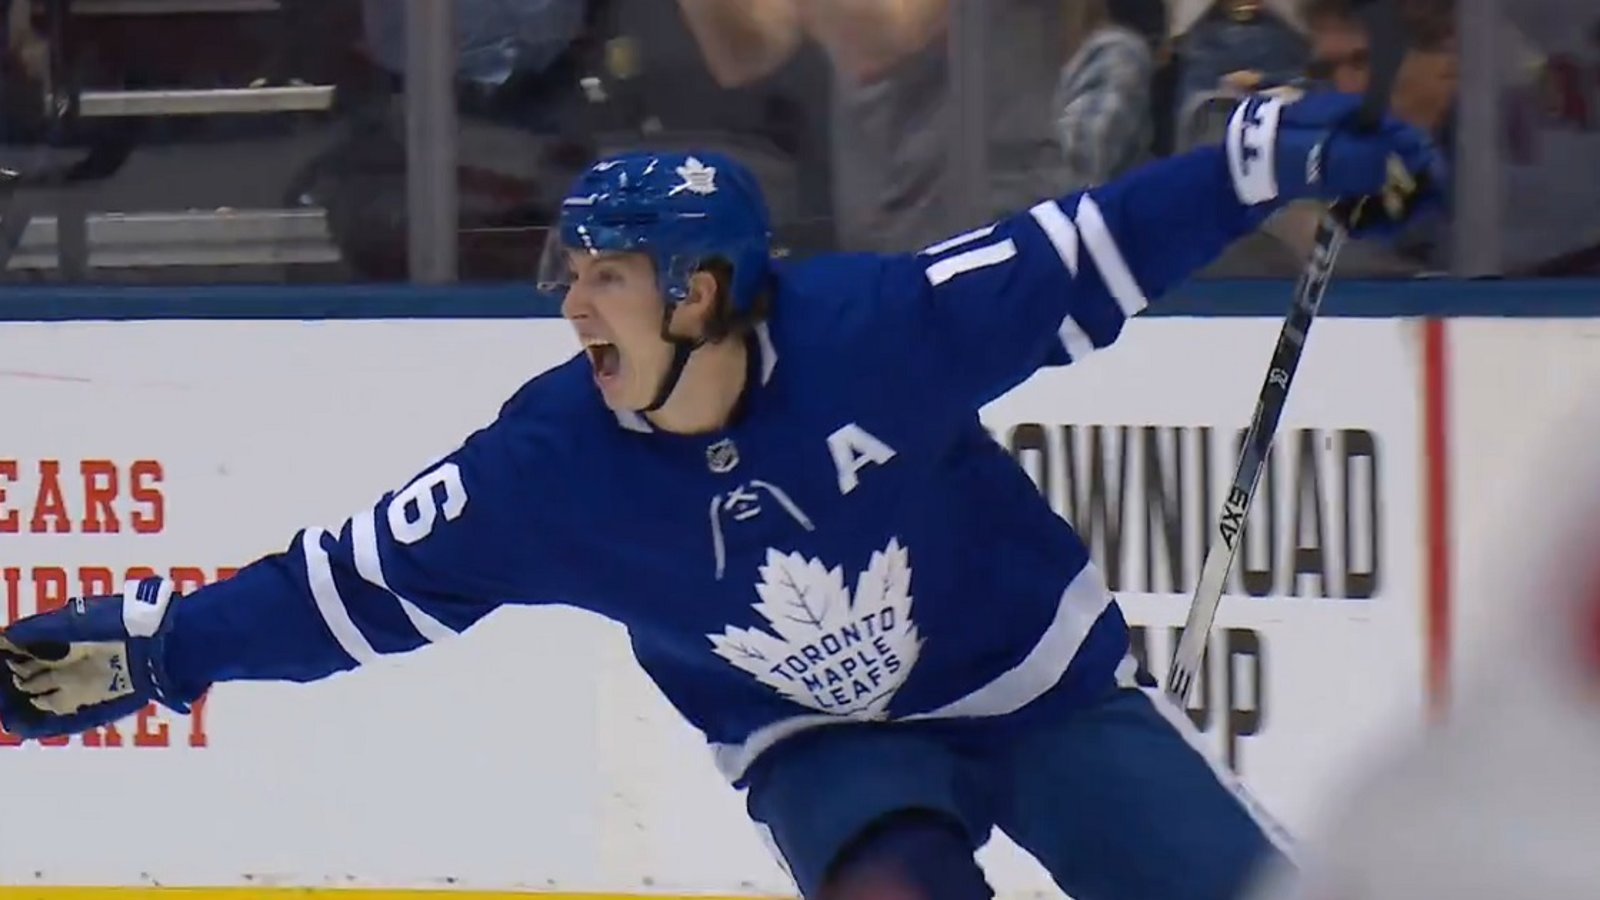 Mitch Marner sets a new Maple Leafs record with a short-handed goal!